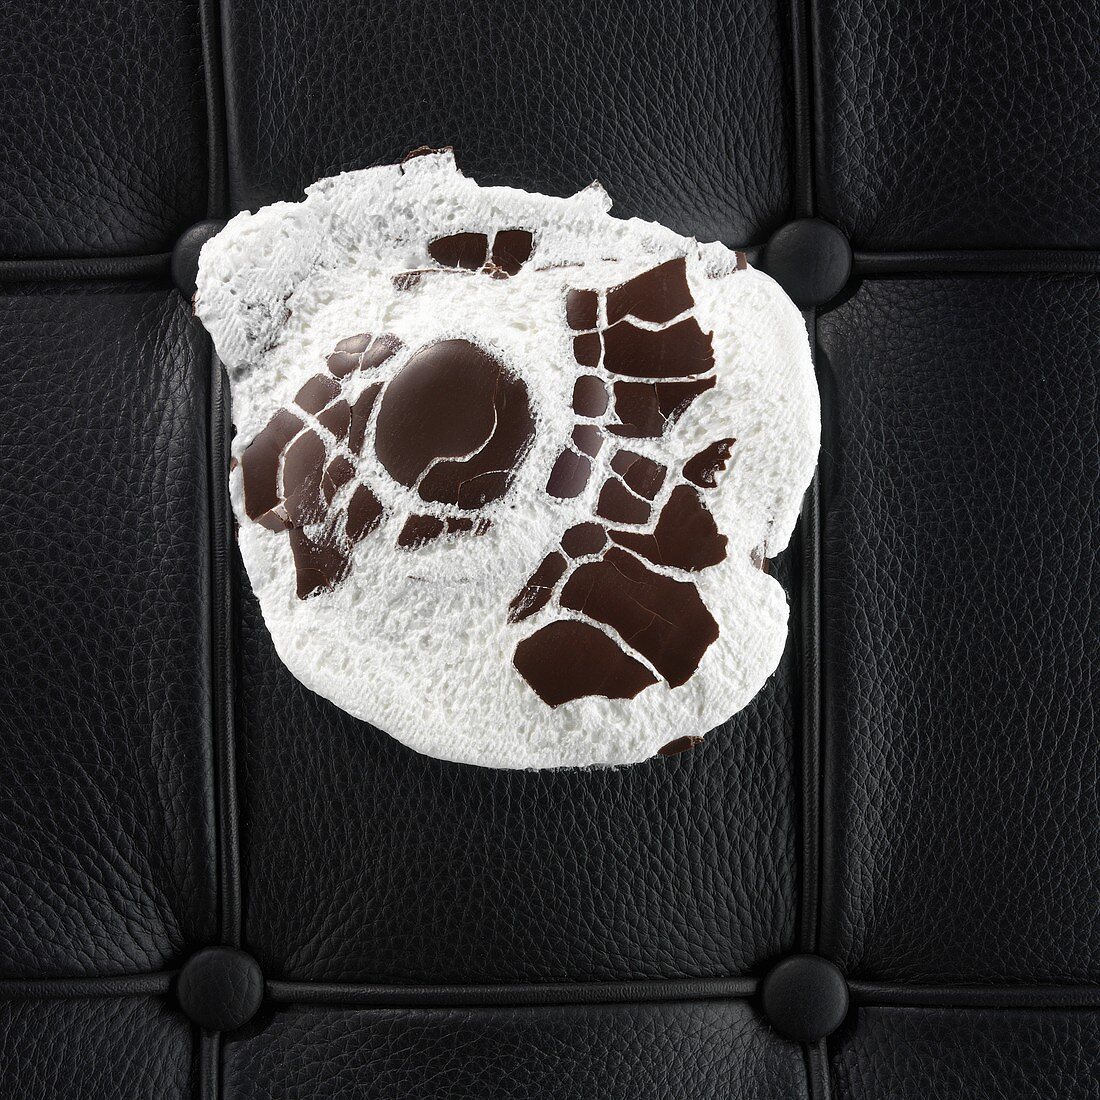 Crushed chocolate marshmallow on couch